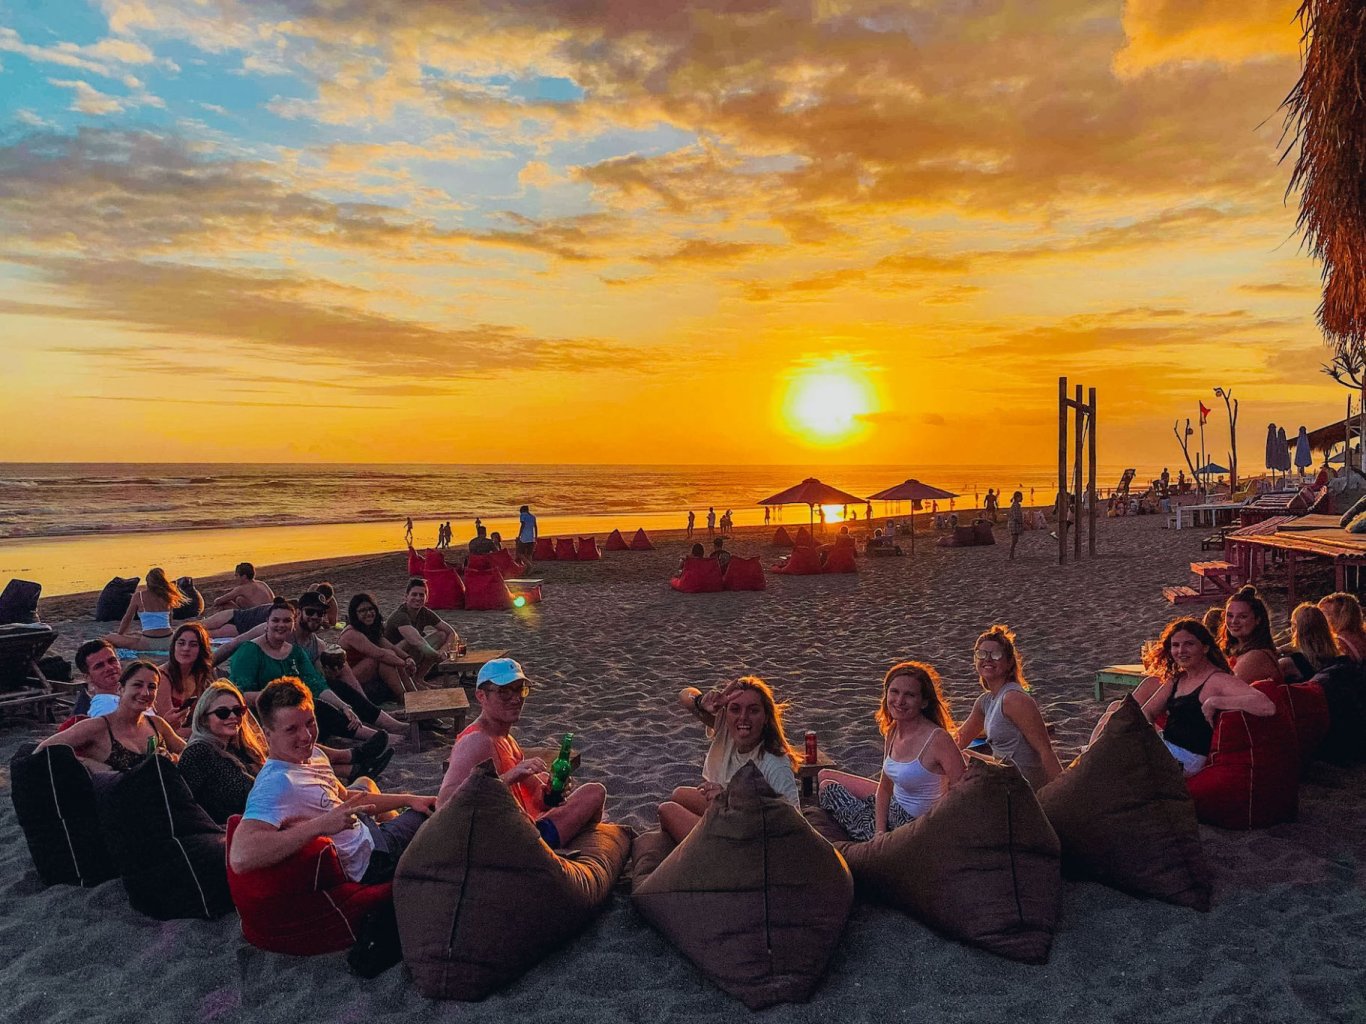 A group shot while lounging in bean bags on the beach, admiring the golden sunset in Bali, Indonesia 